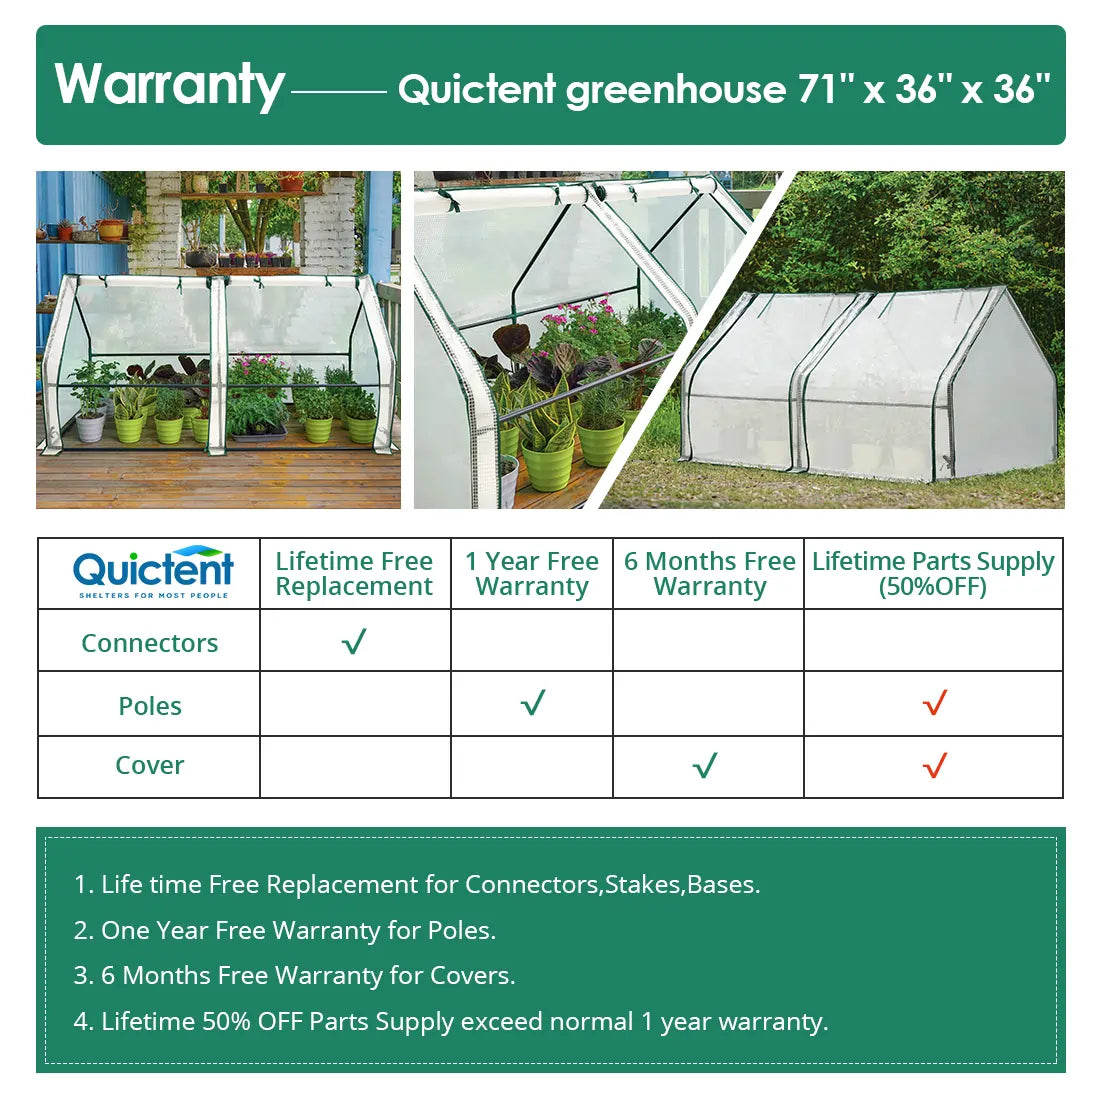 warranty of 71"x36"x36" greenhouse#color_white